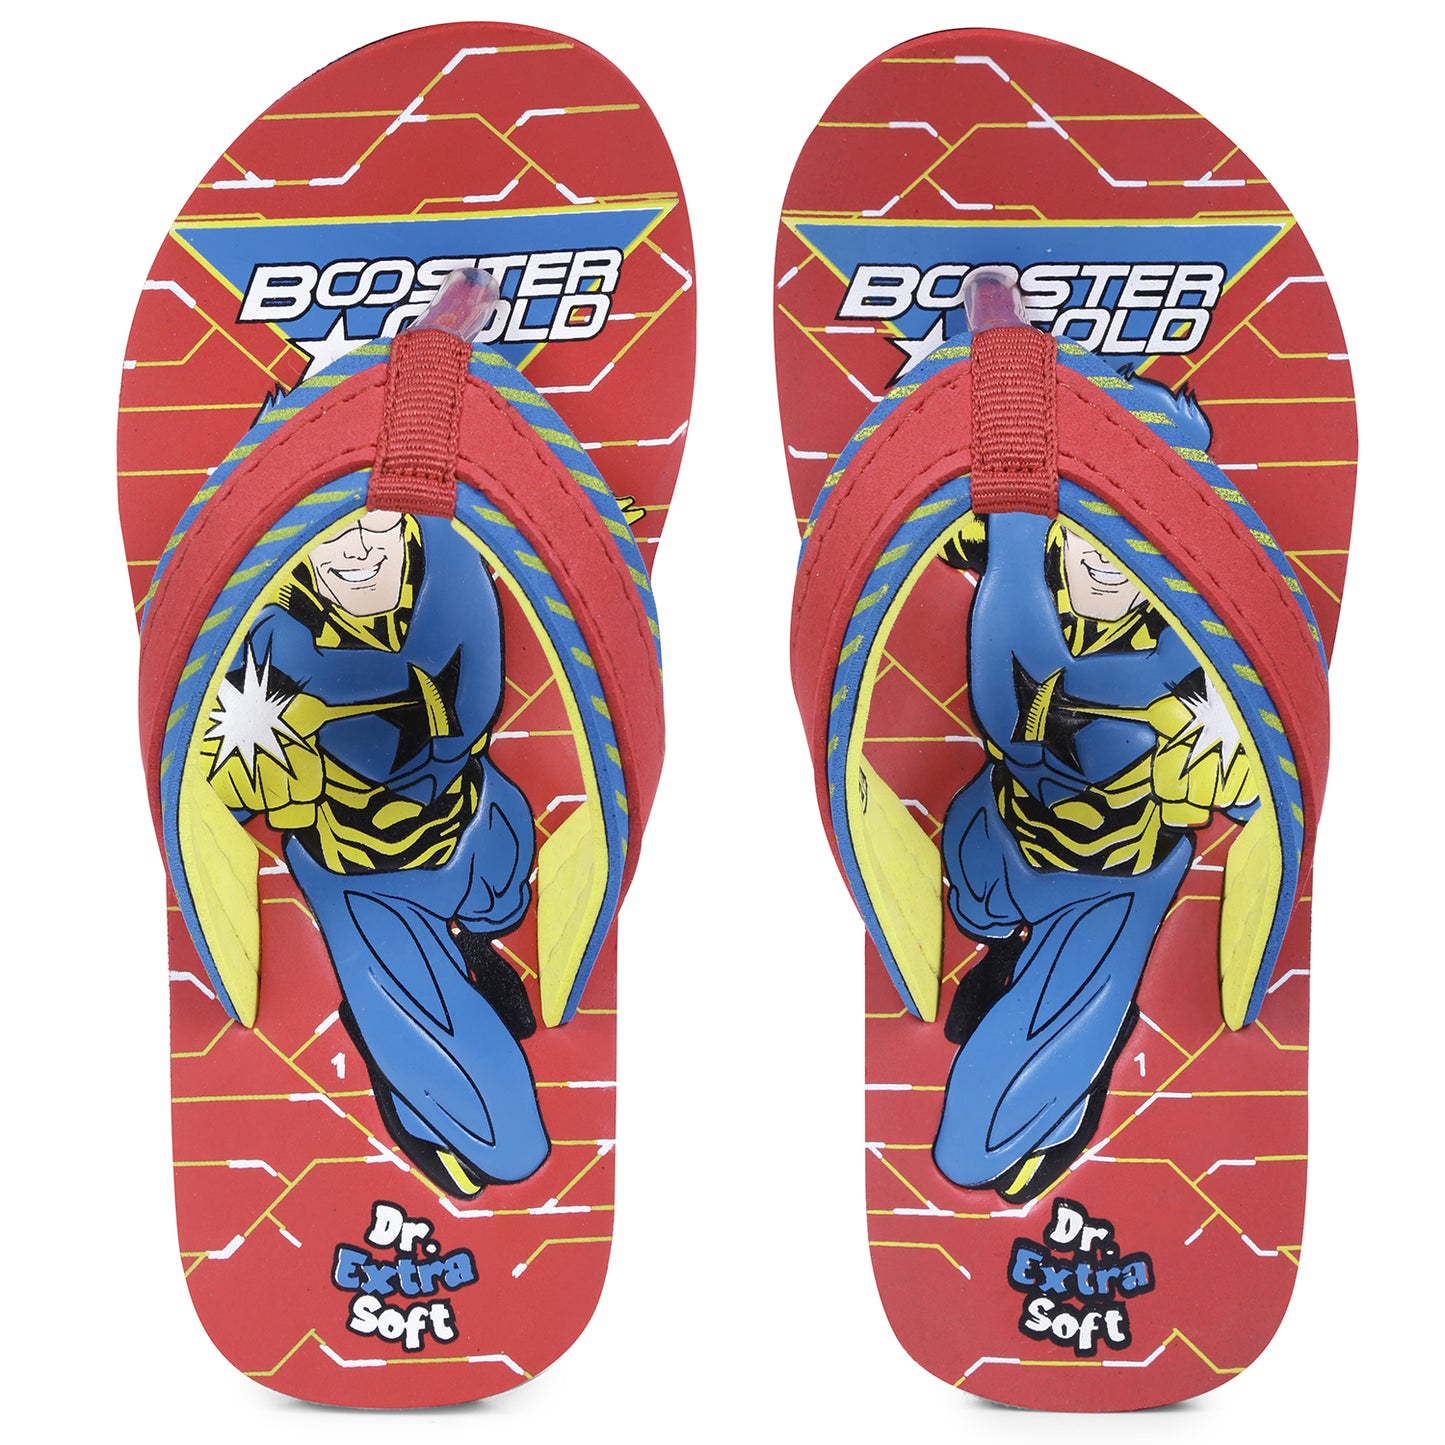 DOCTOR EXTRA SOFT Unisex-Child Kids Flip-Flop (Booster Gold Print) Soft Comfortable Indoor & Outdoor Slippers Stylish Non-Slip Slide Home Casual Cool Cartoon Cute House Chappals For Boys & Girls